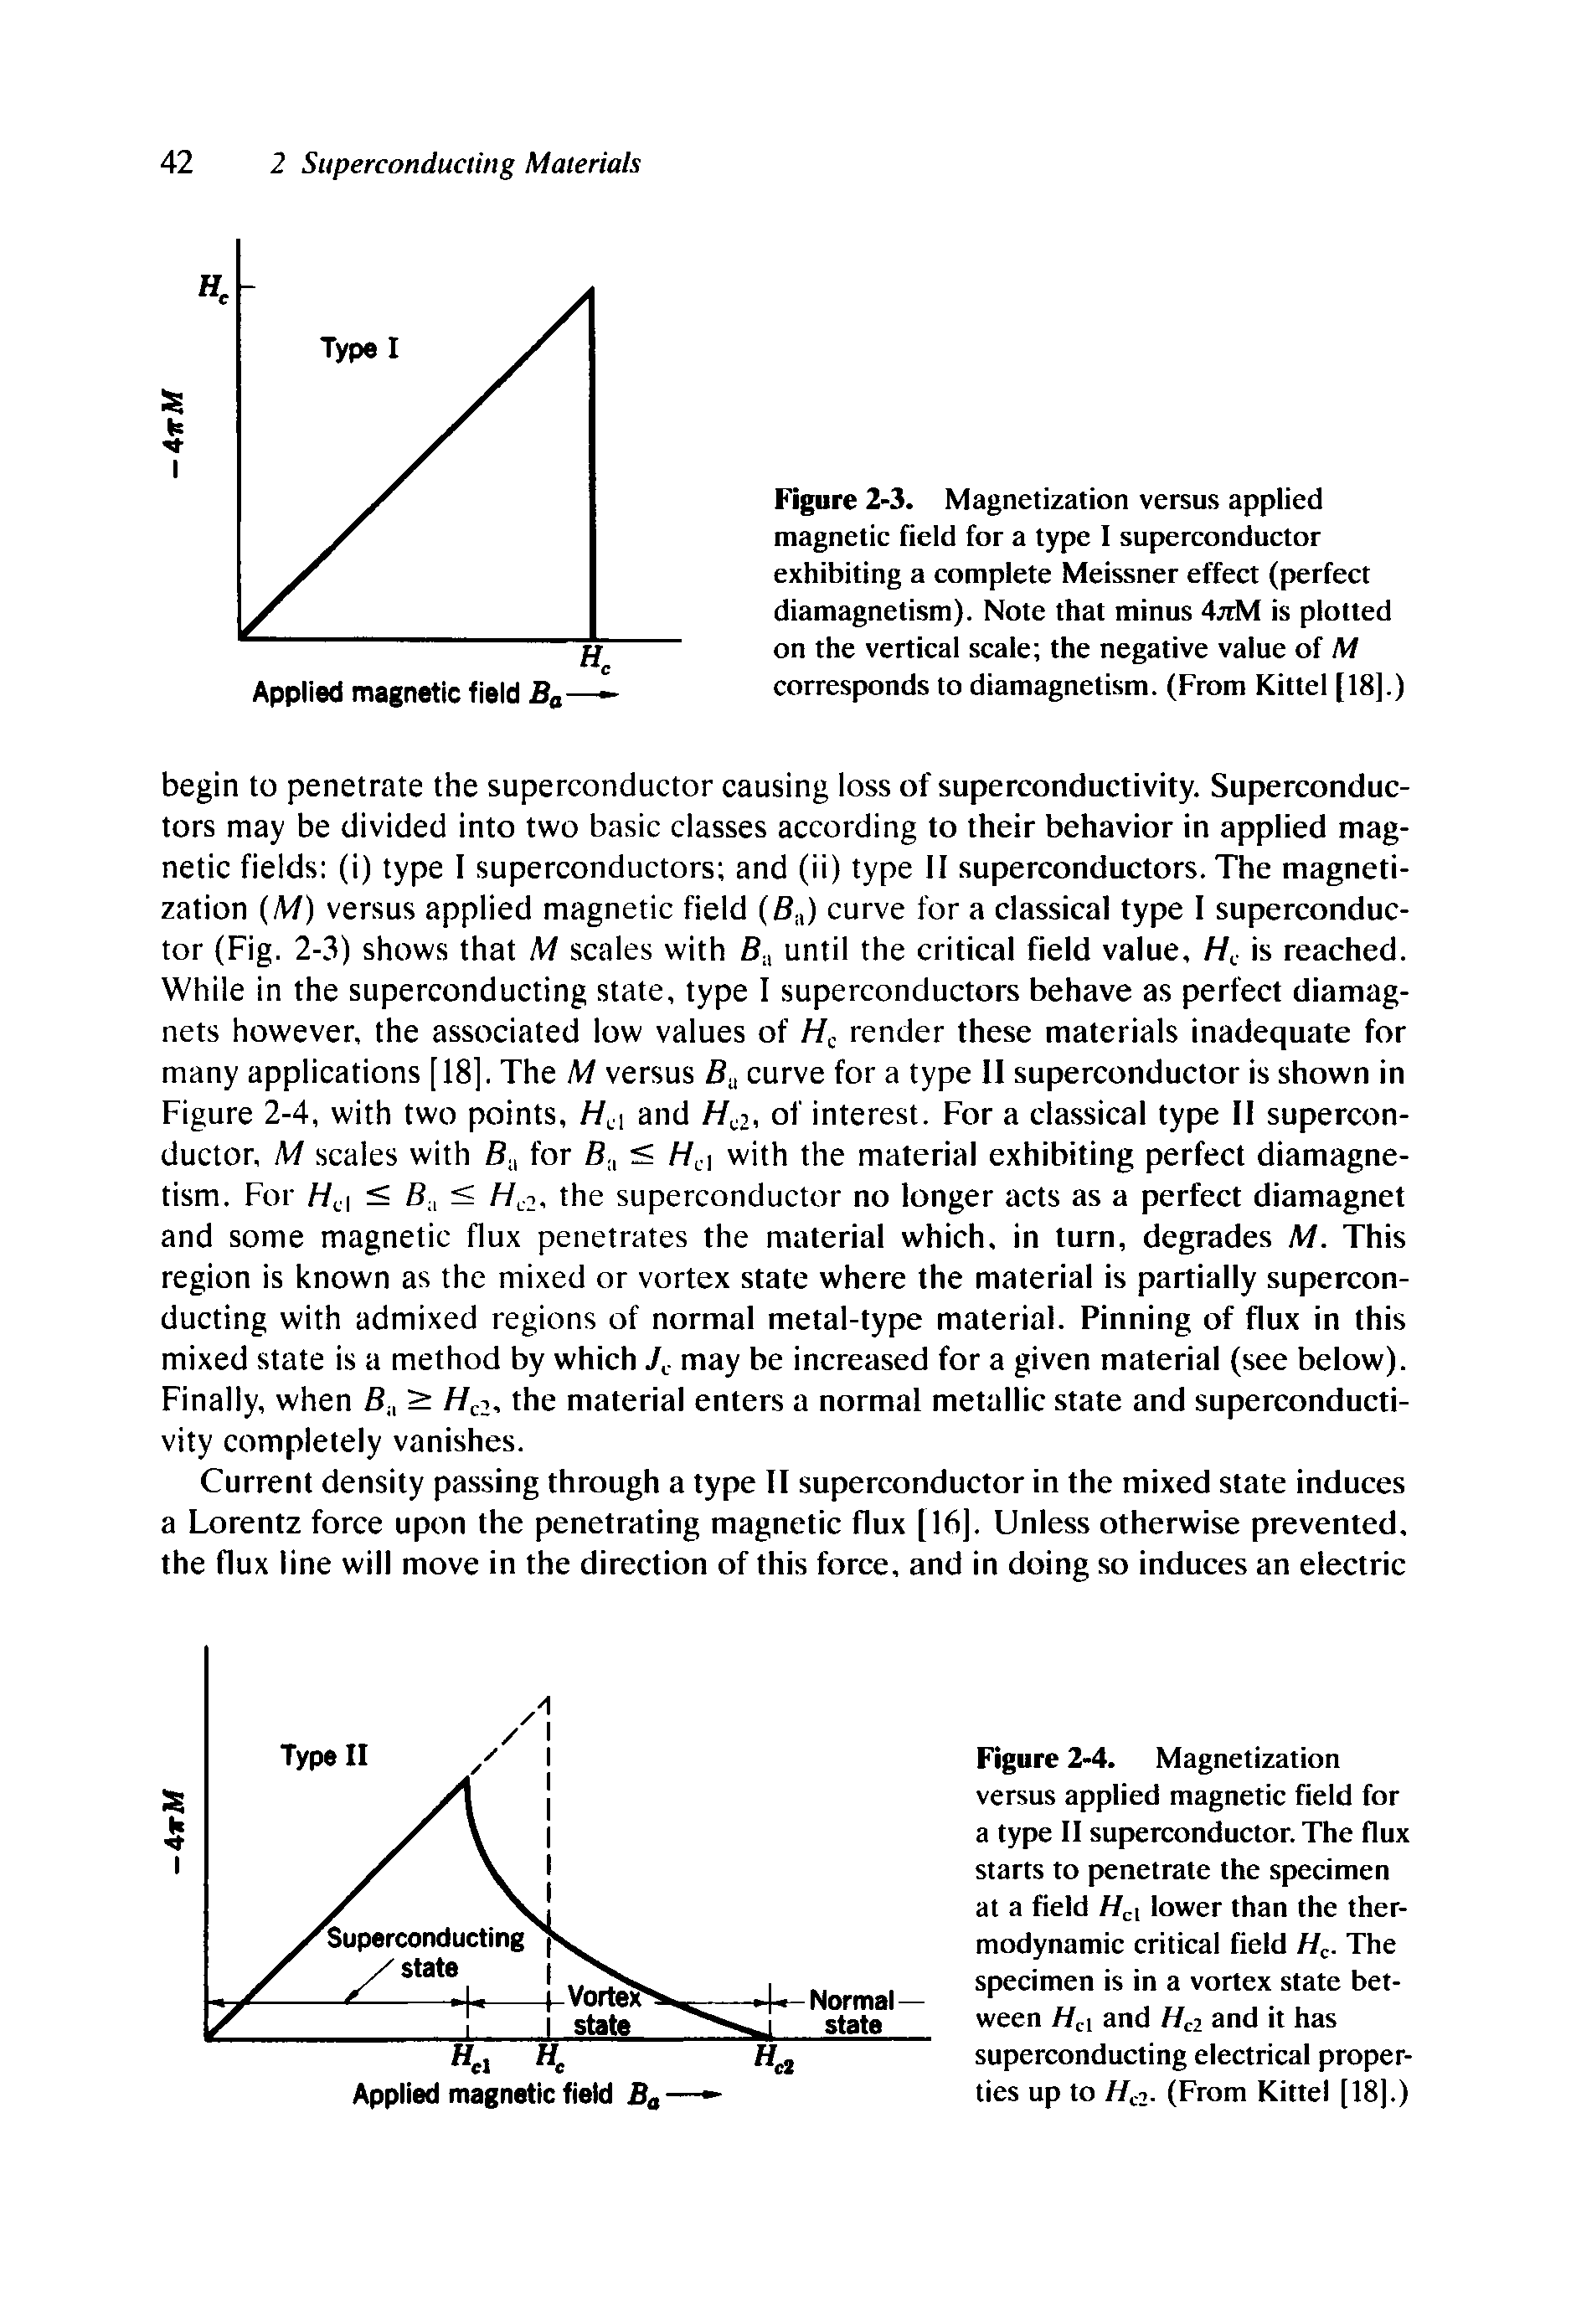 Figure 2-4. Magnetization versus applied magnetic field for a type II superconductor. The flux starts to penetrate the specimen at a field Wei lower than the thermodynamic critical field The specimen is in a vortex state between Wei and Wc2 and it has superconducting electrical properties up to We2. (From Kittel [18].)...